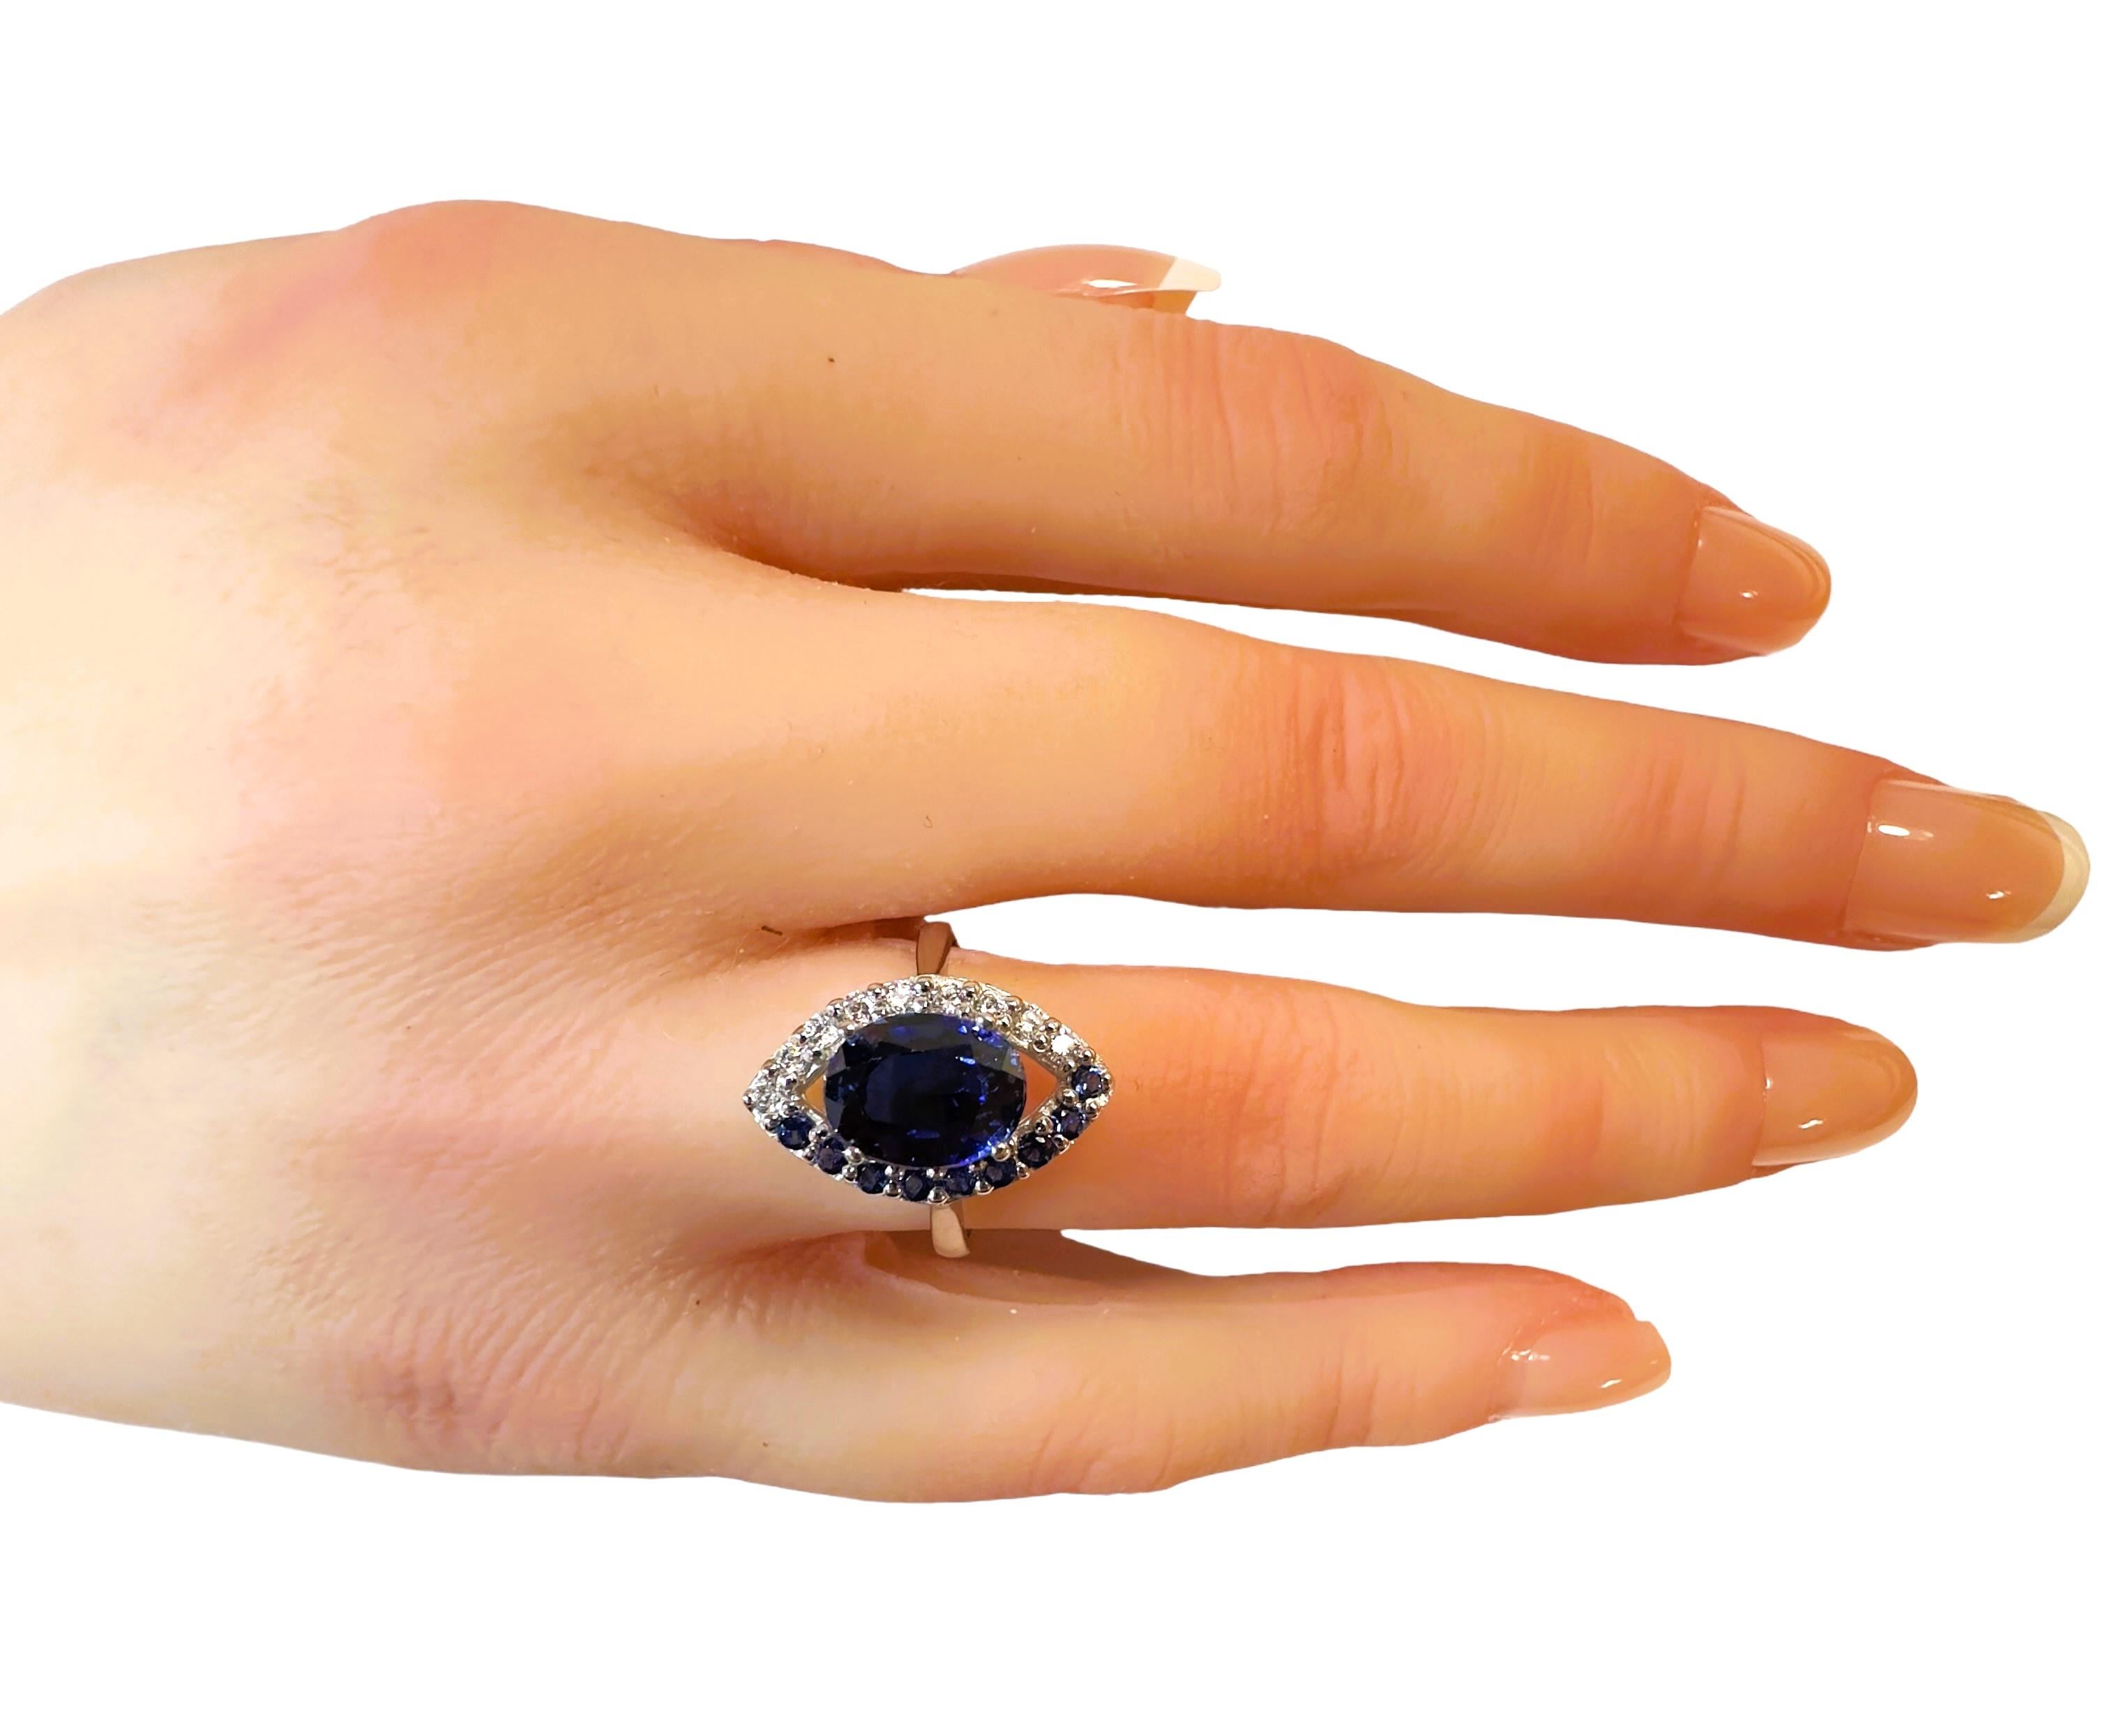 New Handmade African 3.60 Ct Deep Blue Sapphire Sterling Ring Size 6.75 For Sale 2